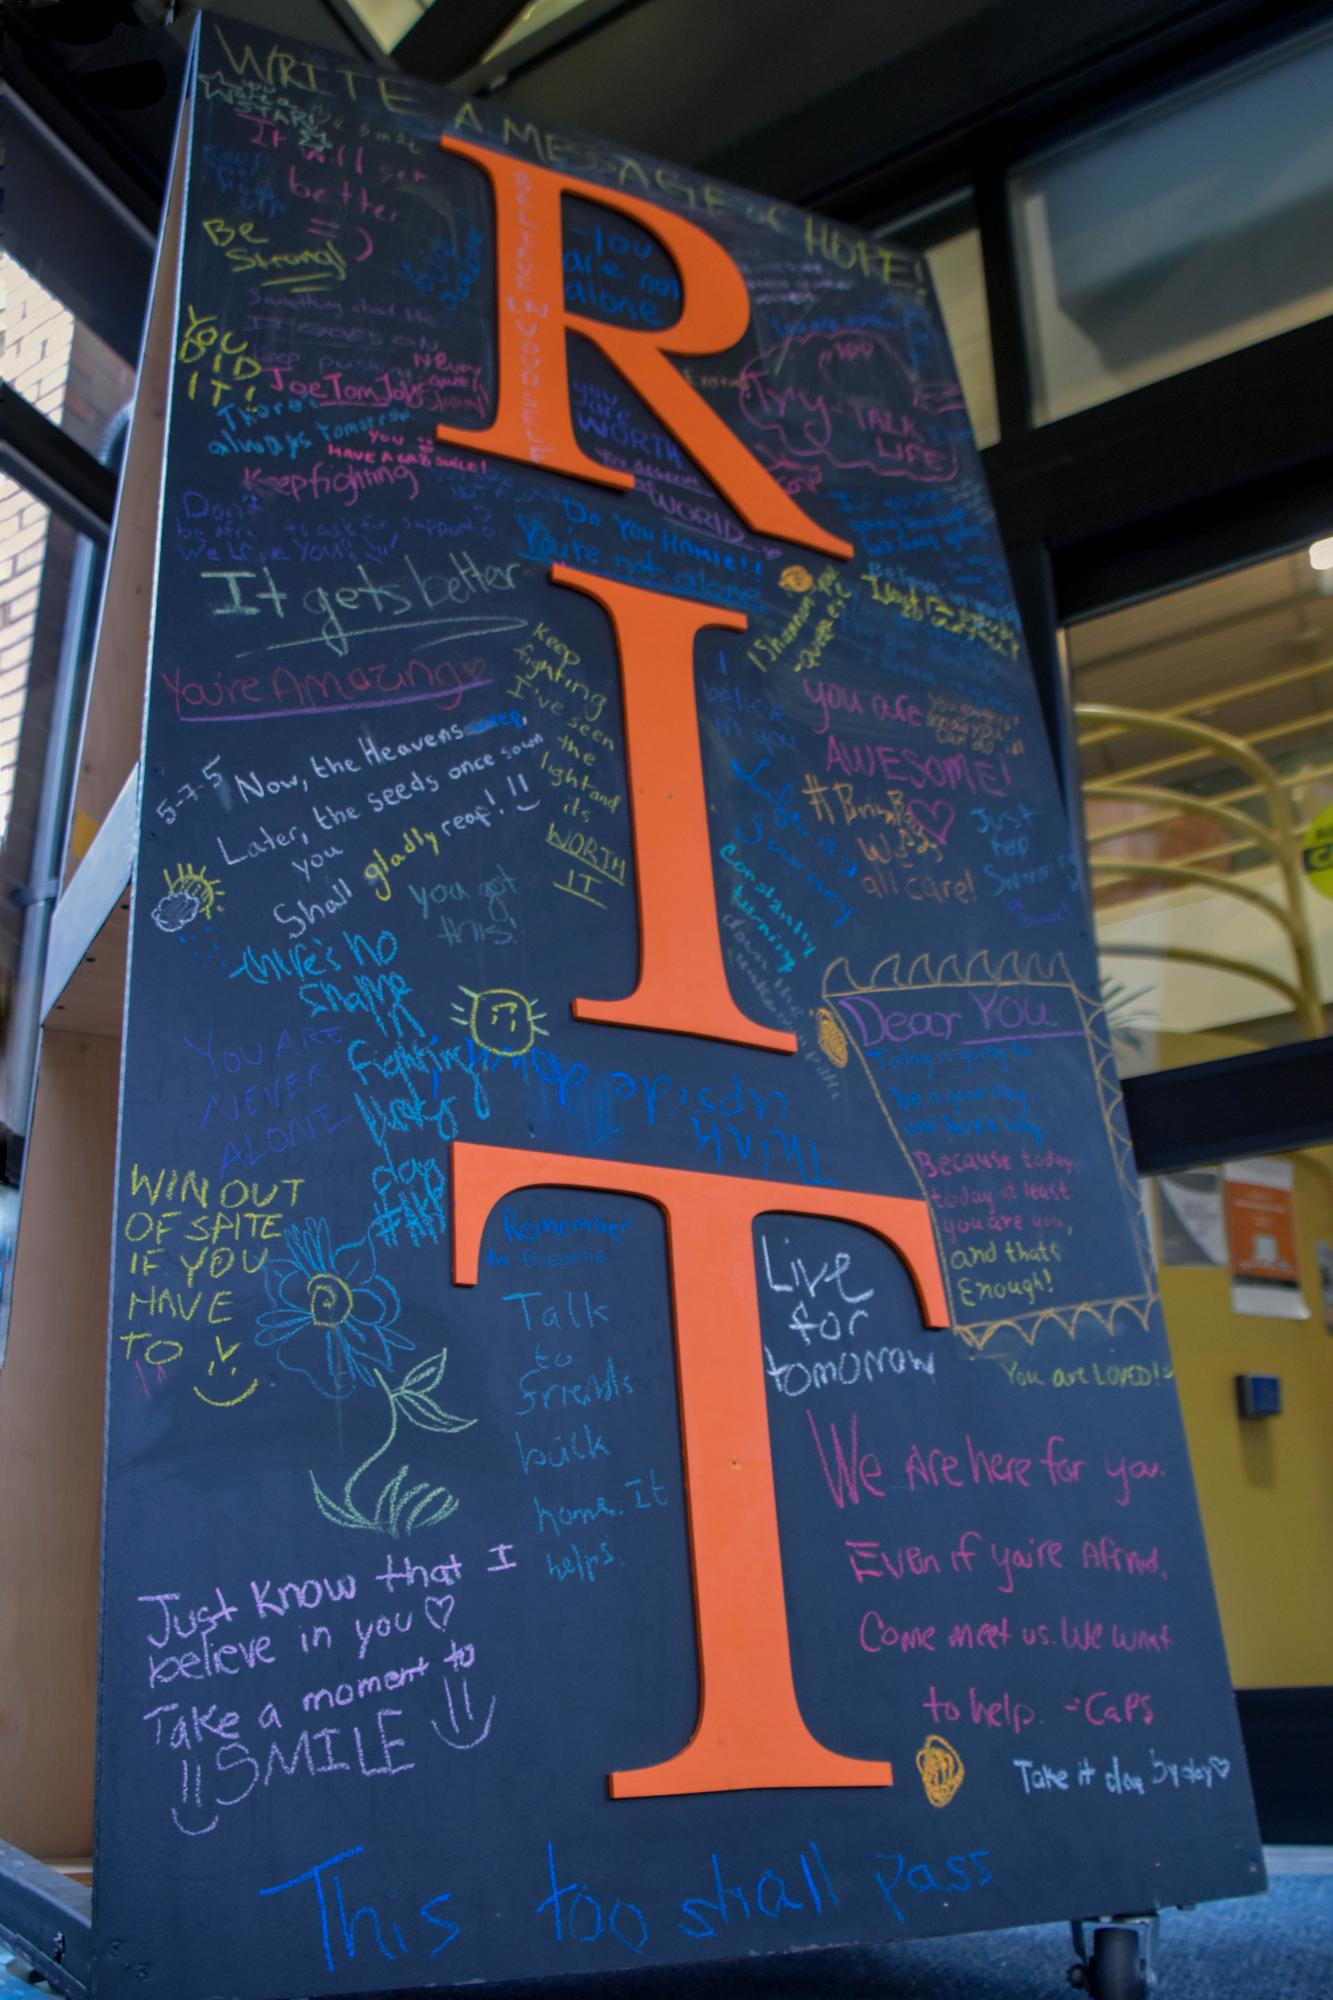 A blackboard outside August Center in Henrietta, N.Y. on Dec. 11, 2018. It is filled with filled with positive quotes written by students at RIT. Photo by Tony Wen